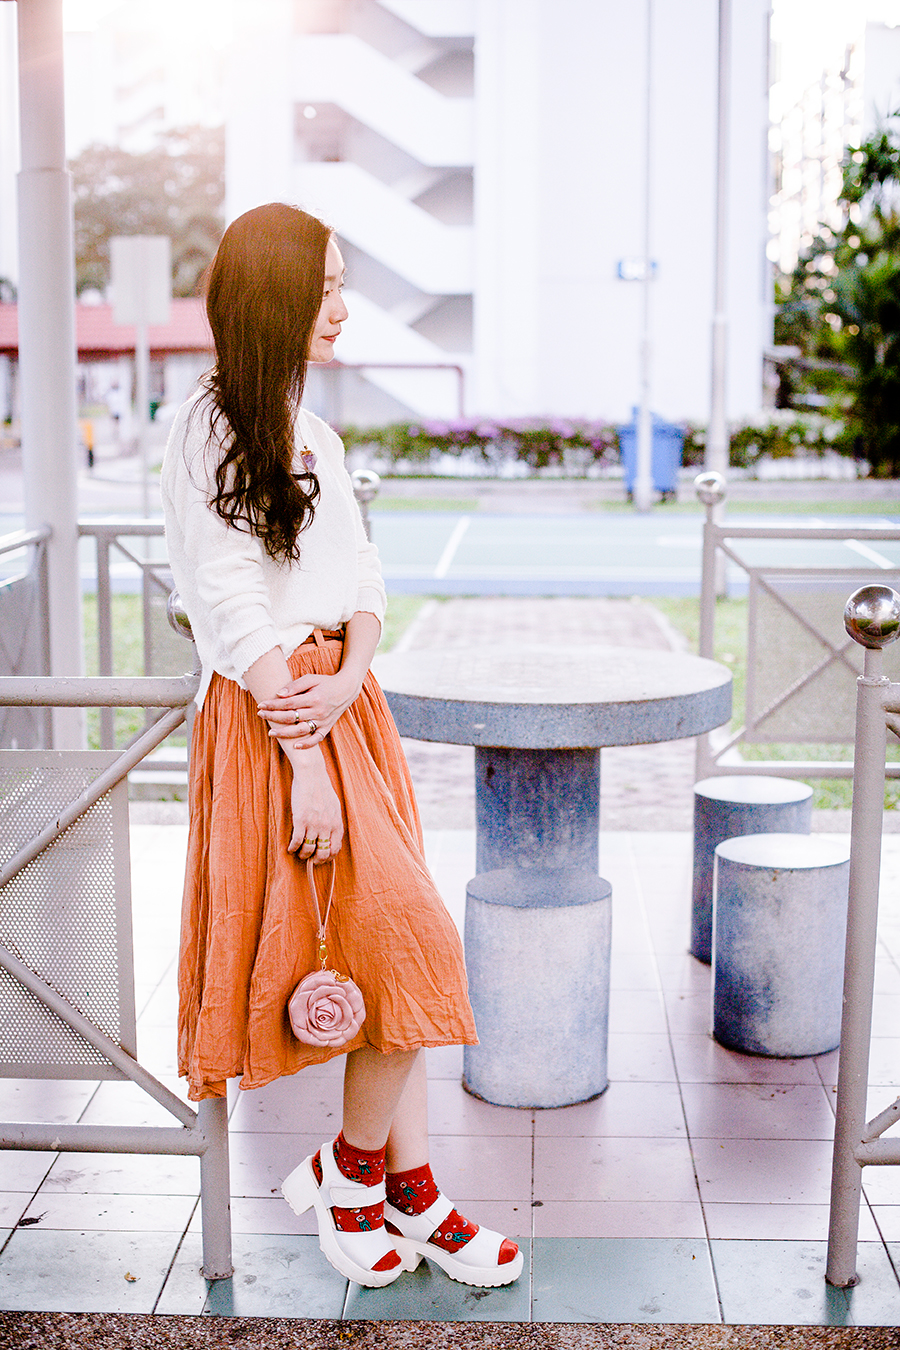 Sunset pastel outfit.